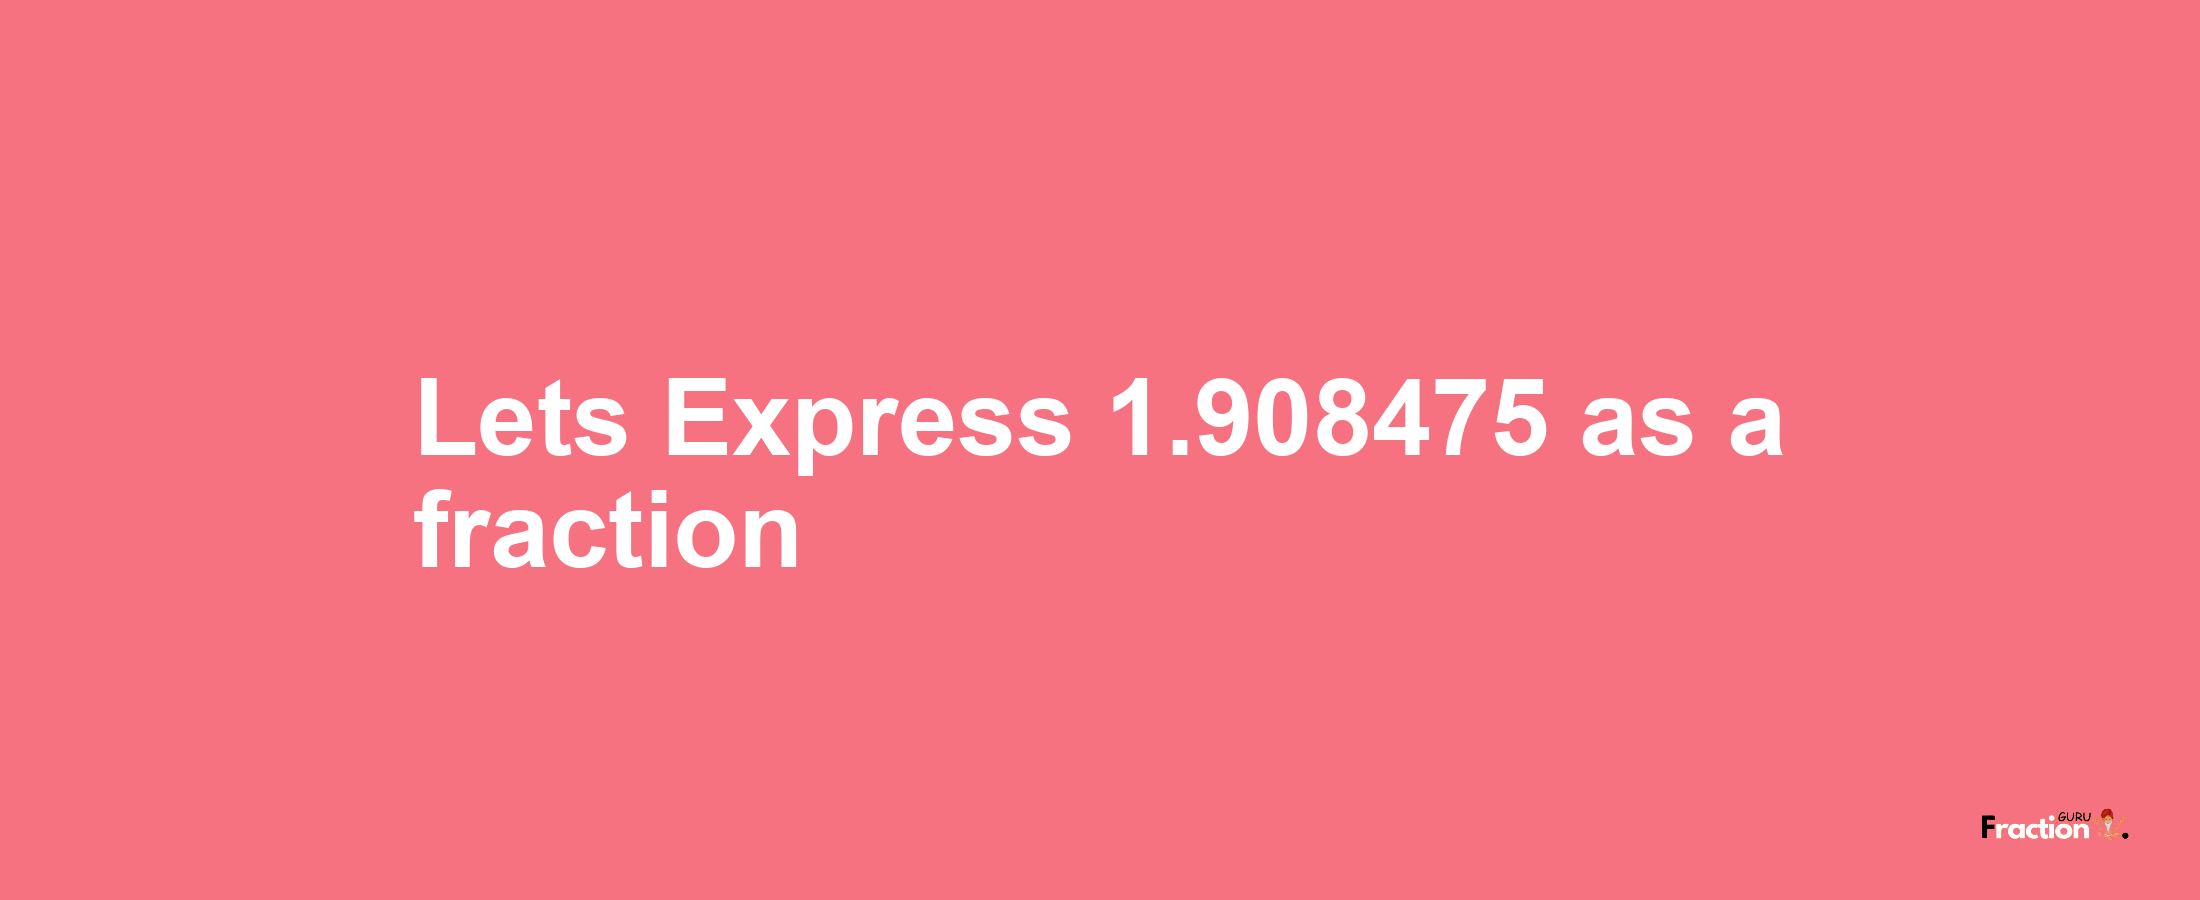 Lets Express 1.908475 as afraction